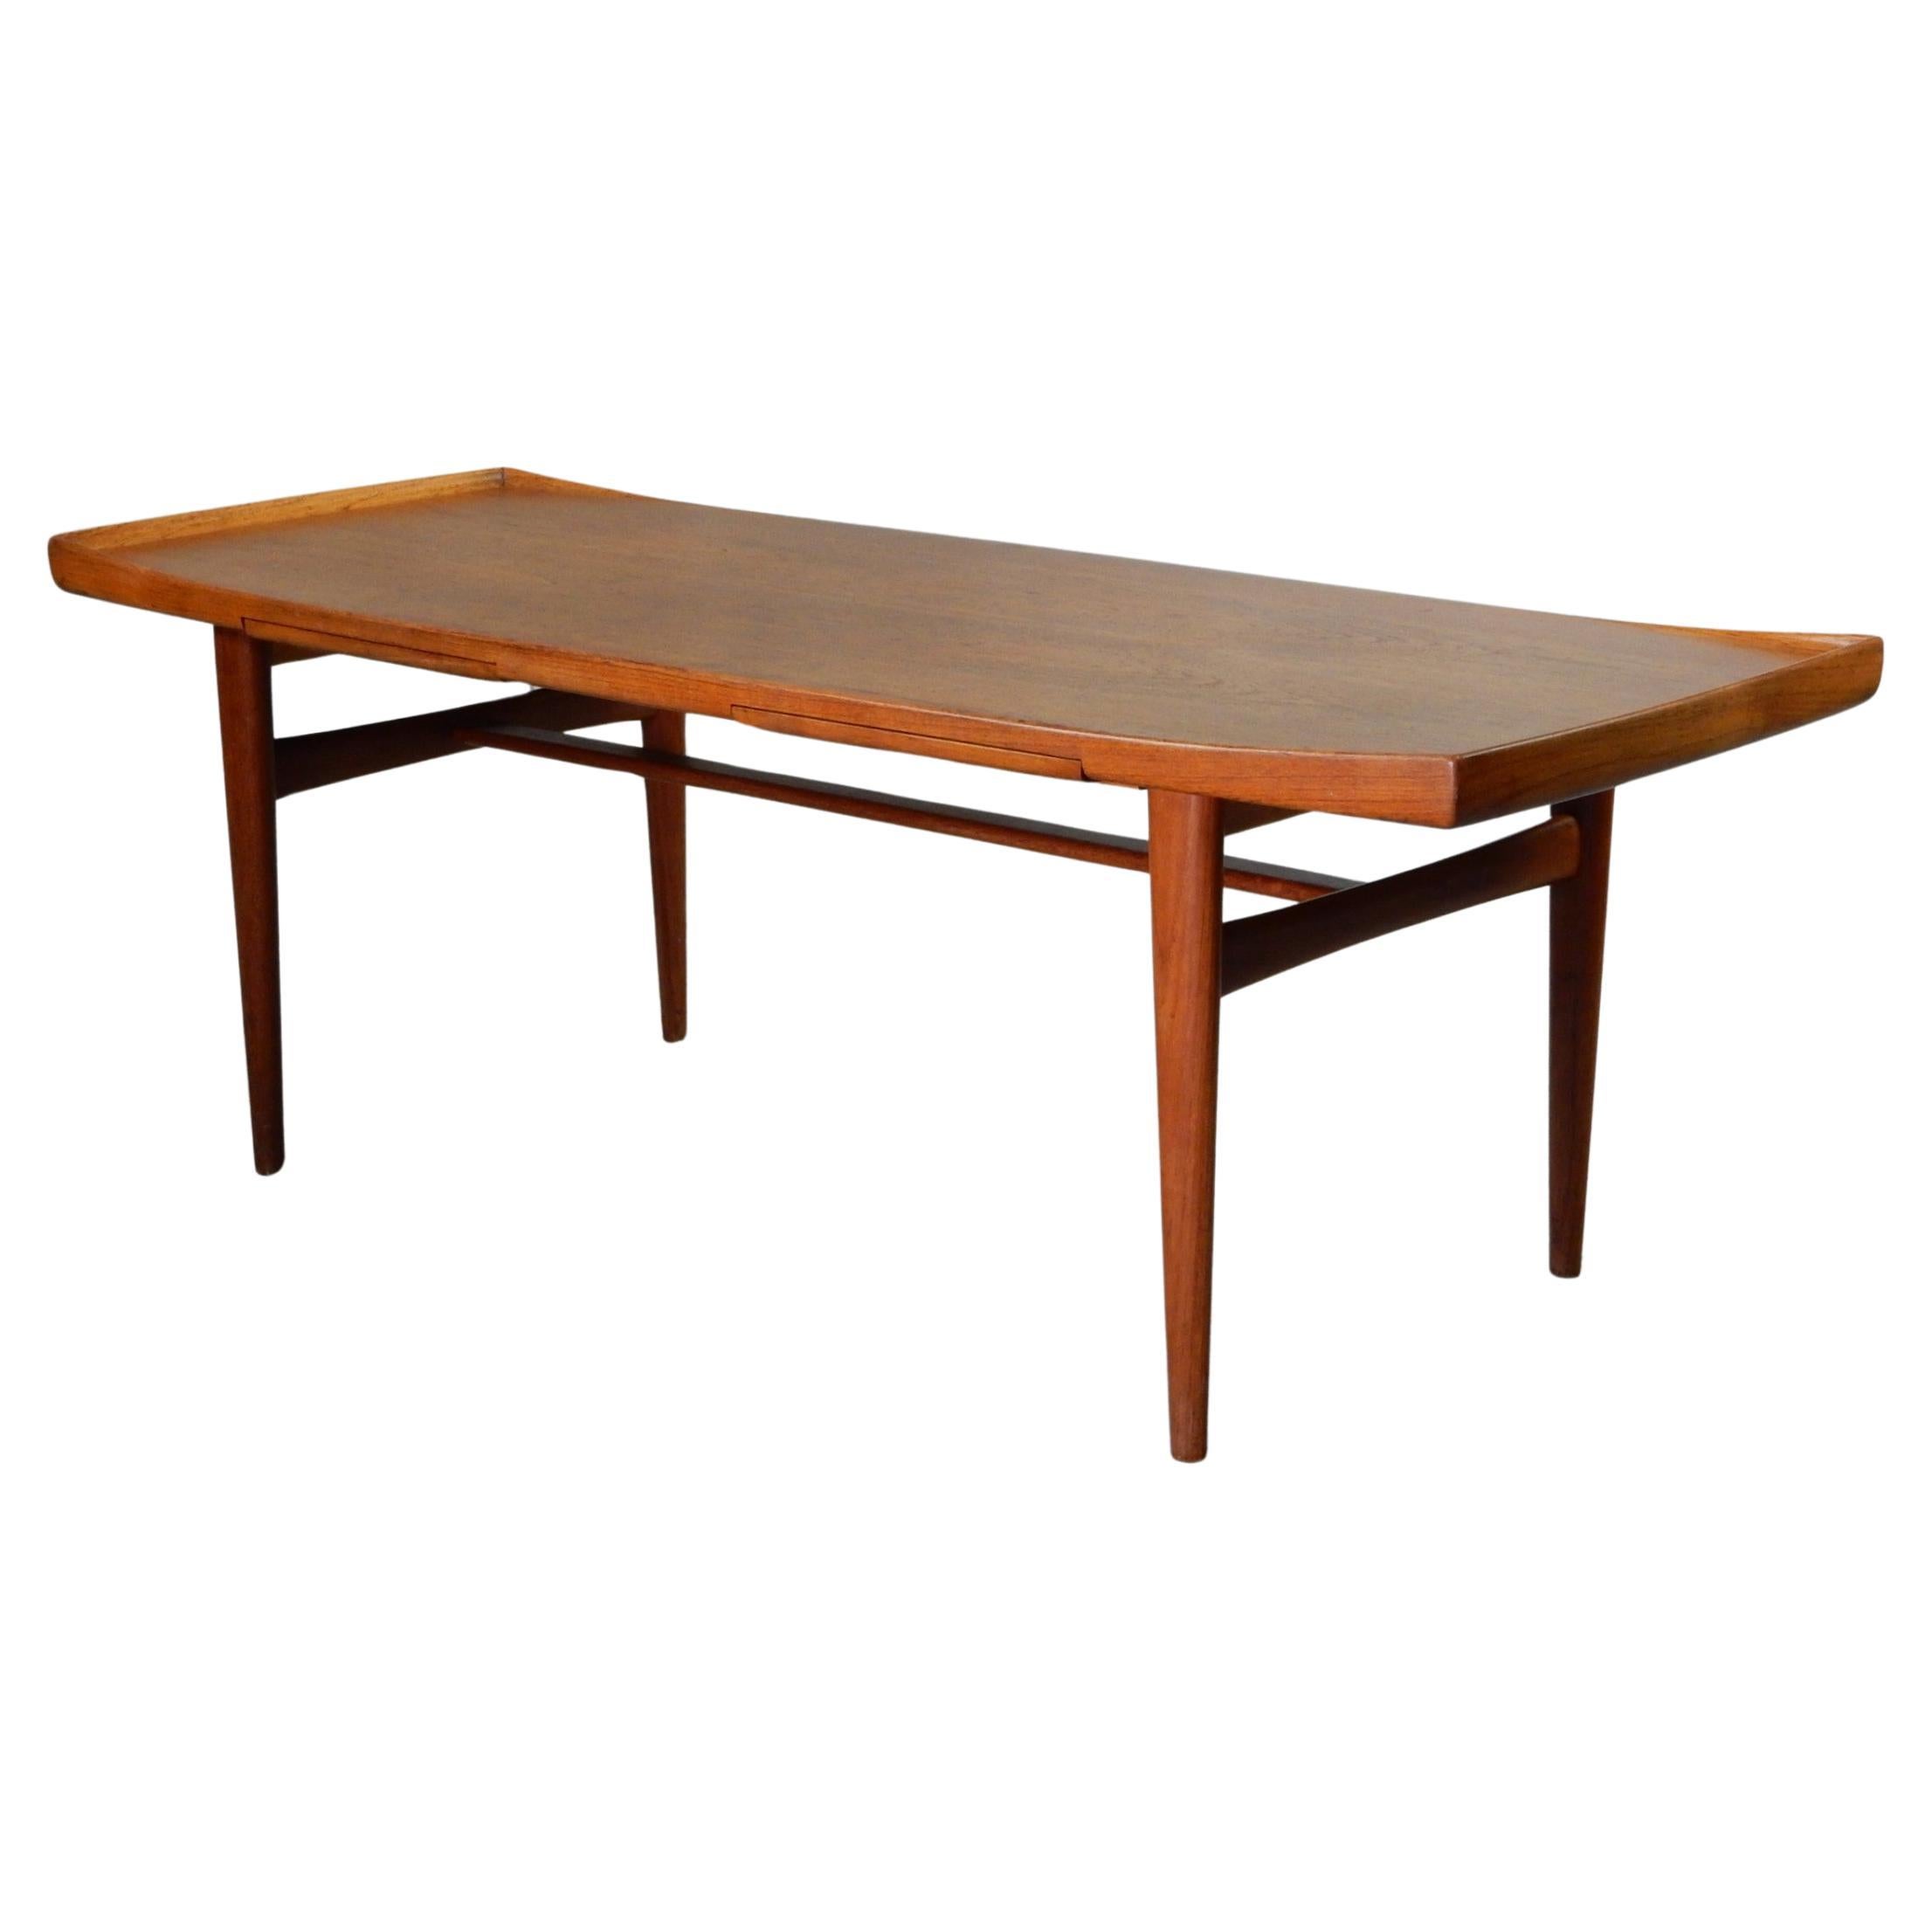 Swedish mid century teak coffee table by designer Alf Svensson, circa 1960s. This table features 2 olive color laminate side extensions from either side which serve as excellent area for beverages etc. The gorgeous grain top has sculpted lip on the